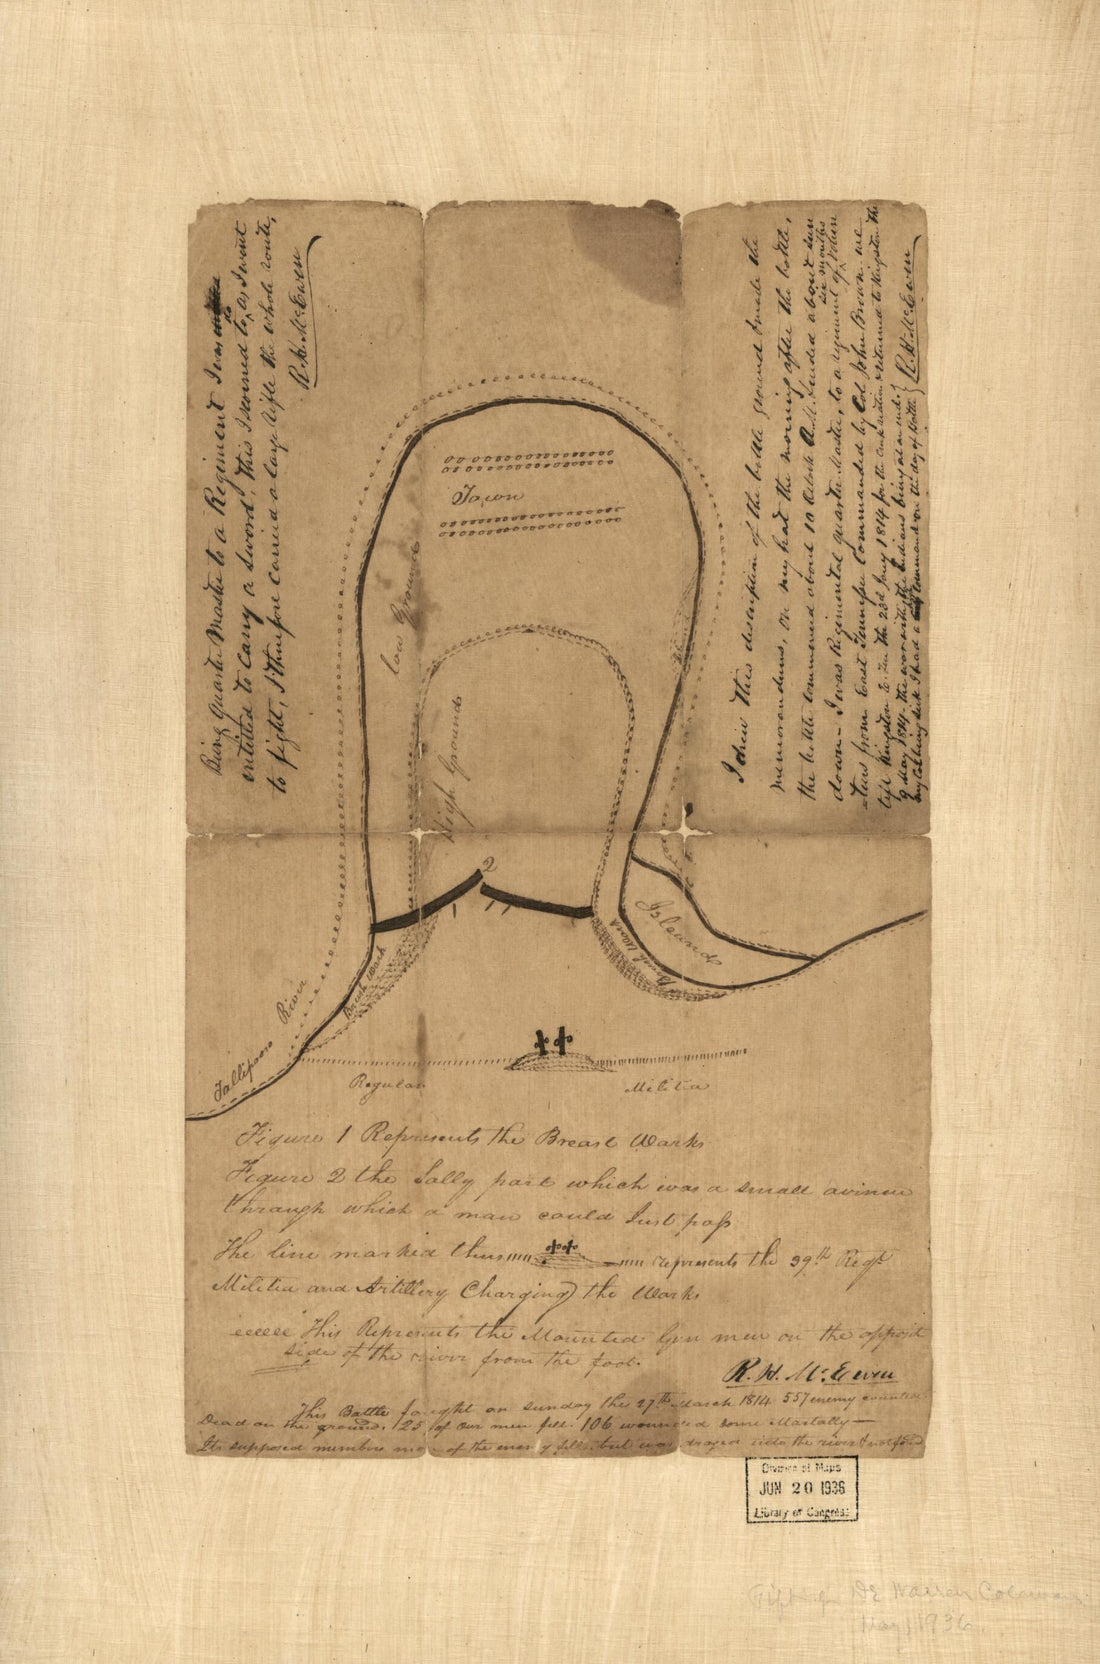 This old map of Sketch Map of the Battle of Horseshoe Bend of Tallapoosa River, 27th March from 1814 was created by R. H. (Robert Houston) McEwen in 1814